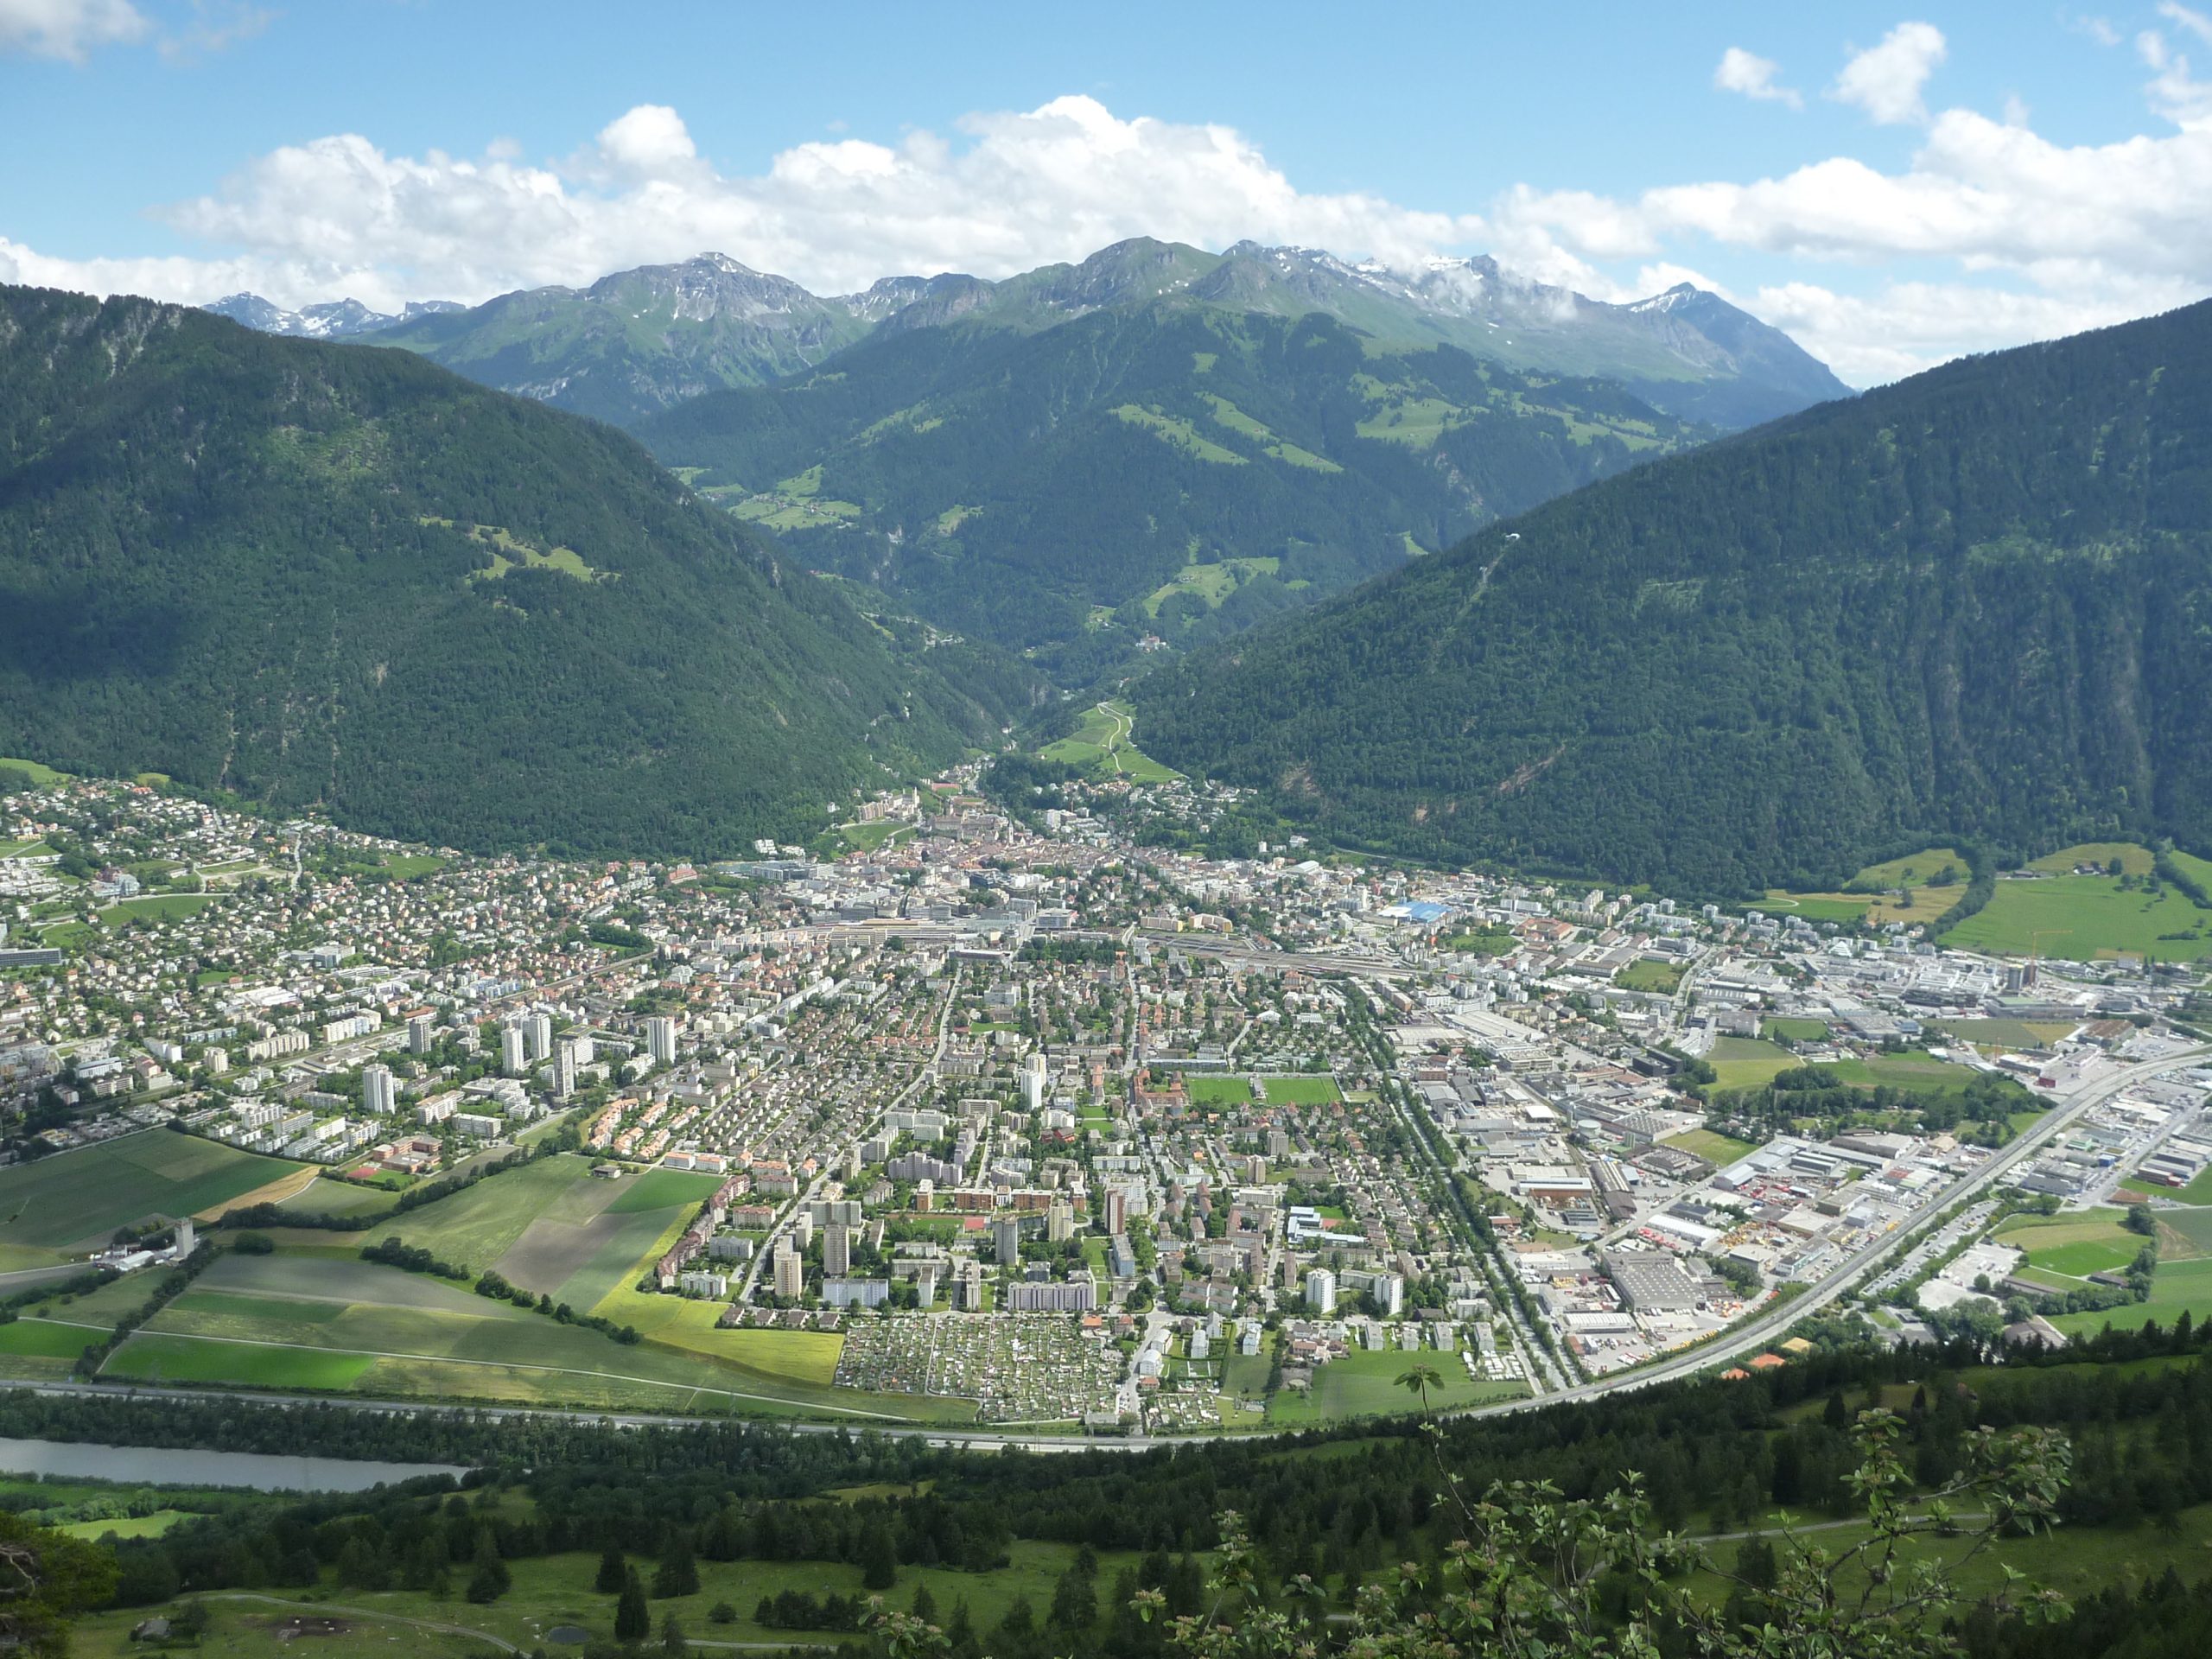 Figure 2. The city of Chur in the canton of Grison, Switzerland.